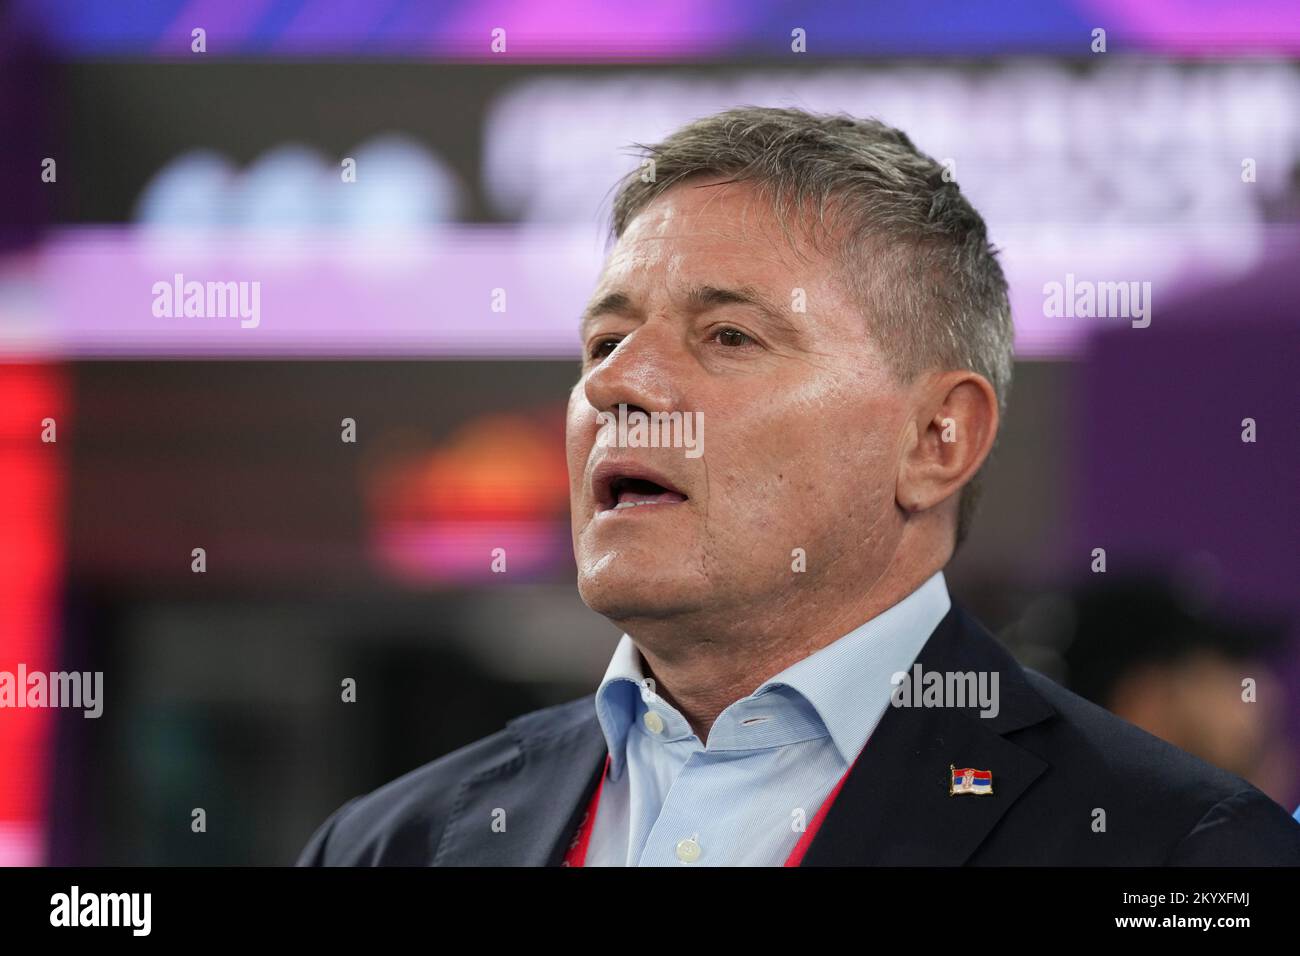 Doha, Qatar. 2nd Dec, 2022. Dragan Stojkovic, head coach of Serbia, is seen before the Group G match between Serbia and Switzerland at the 2022 FIFA World Cup at Stadium 974 in Doha, Qatar, Dec. 2, 2022. Credit: Zheng Huansong/Xinhua/Alamy Live News Stock Photo